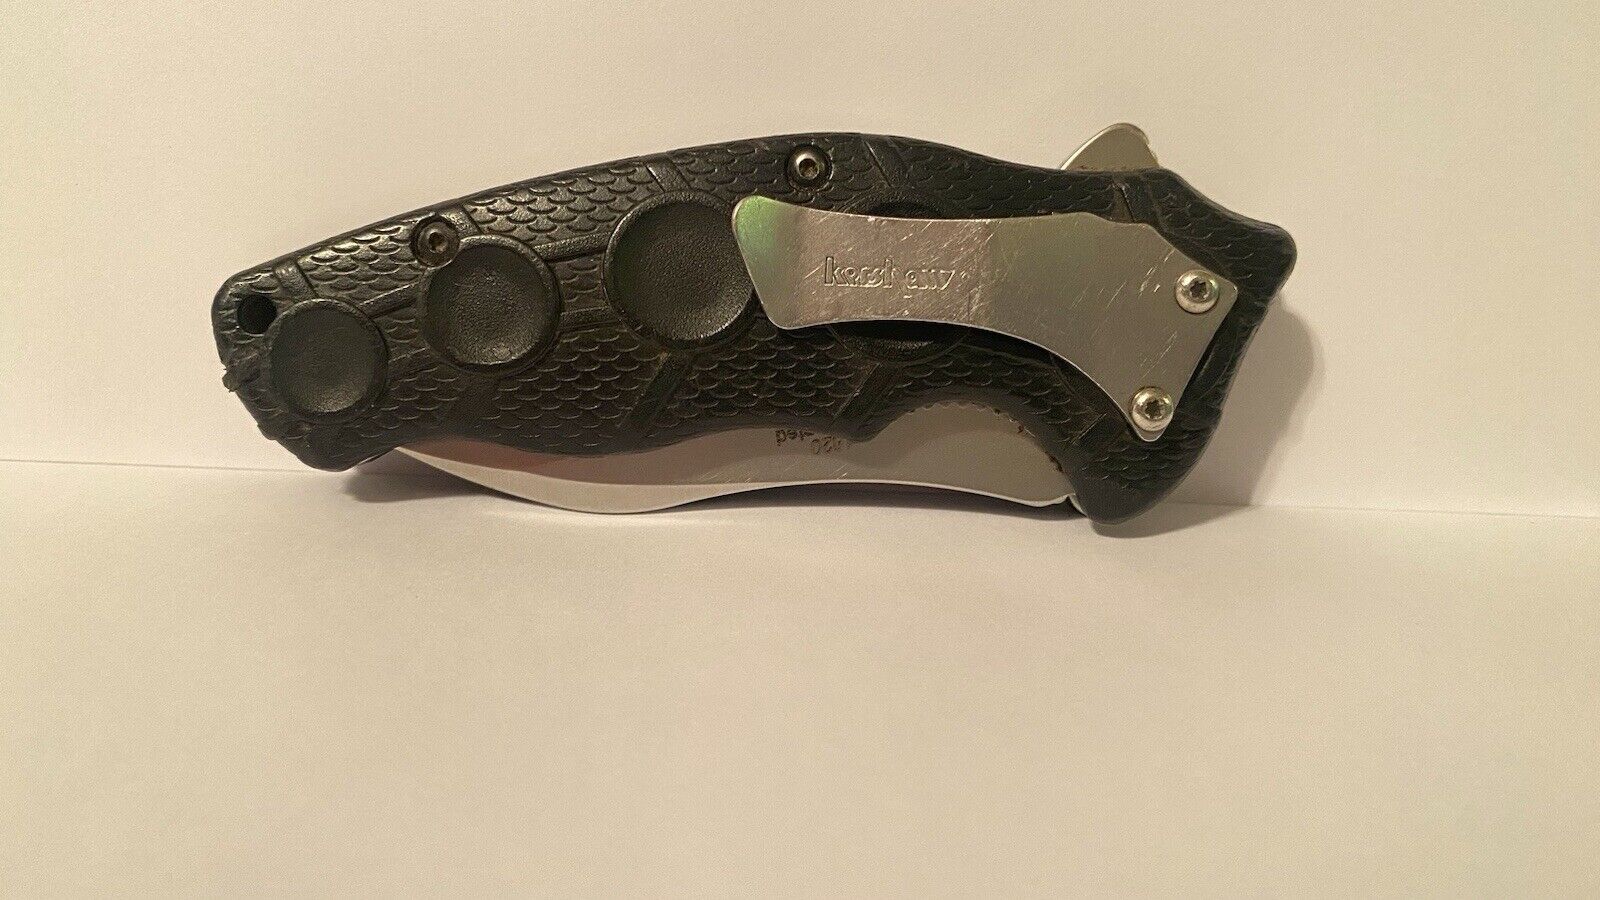 Kershaw 1820 Needs Work Knife Made In USA